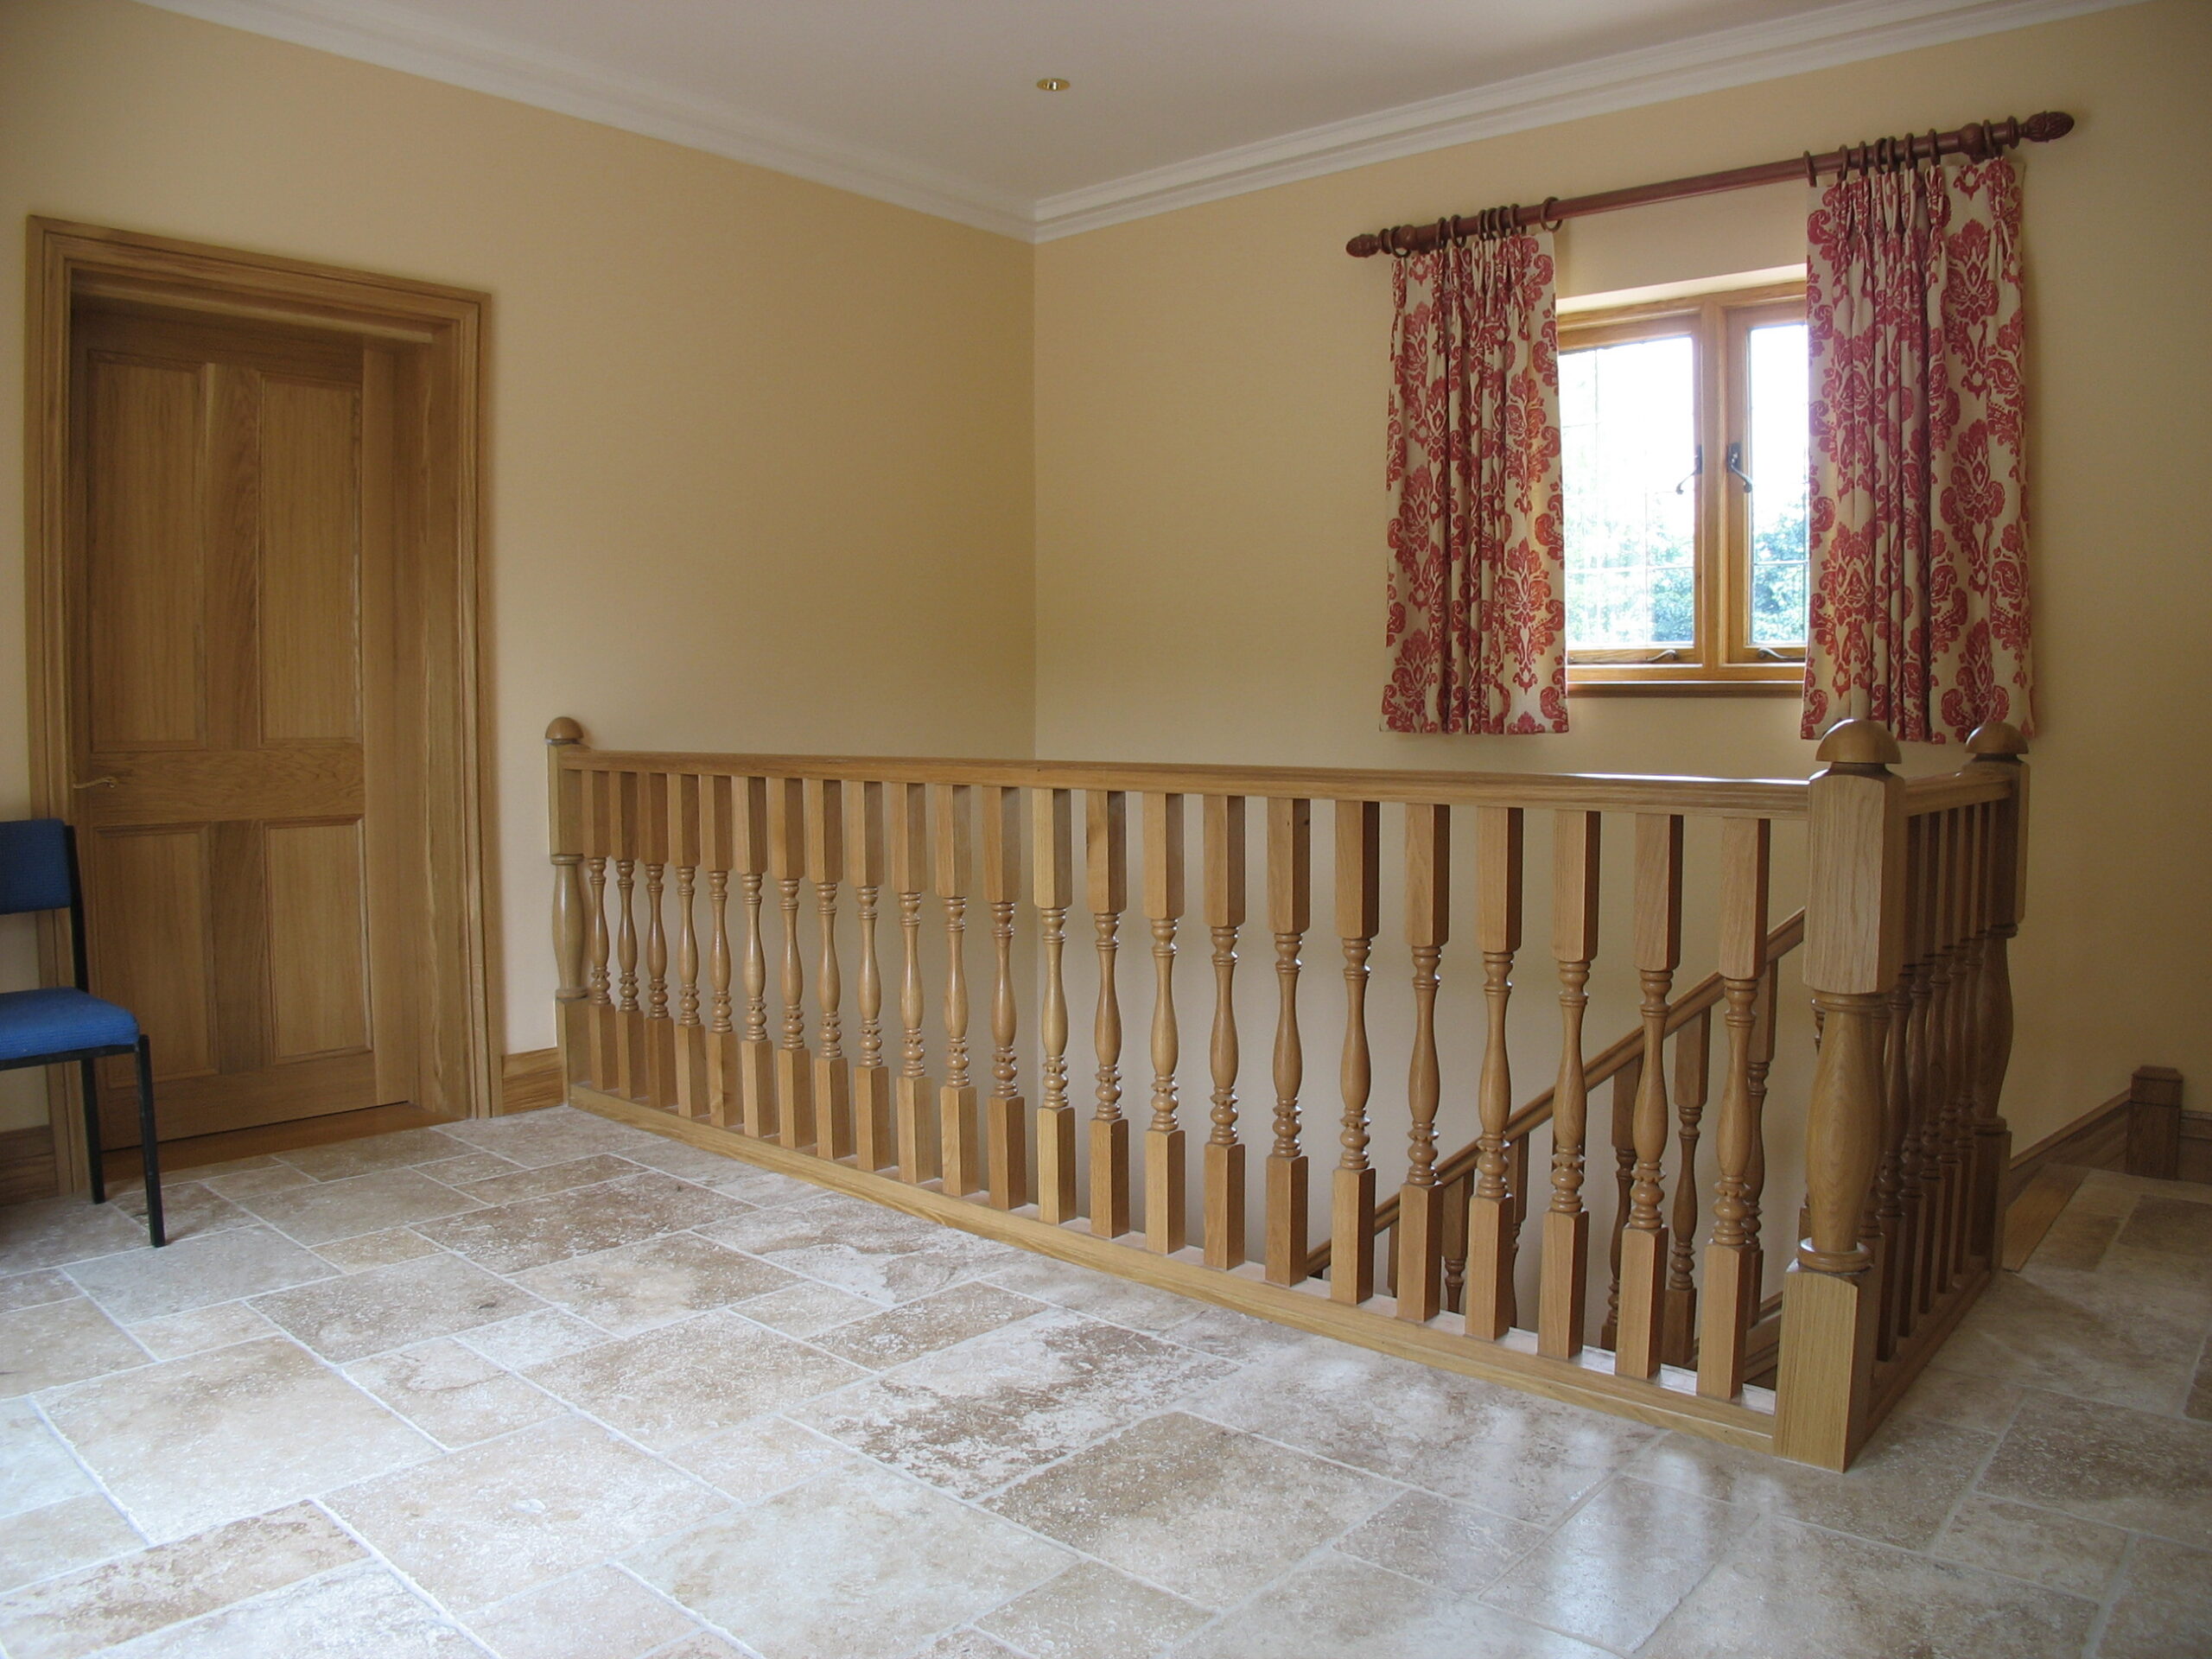 DBSJ - Oak with turned spindles